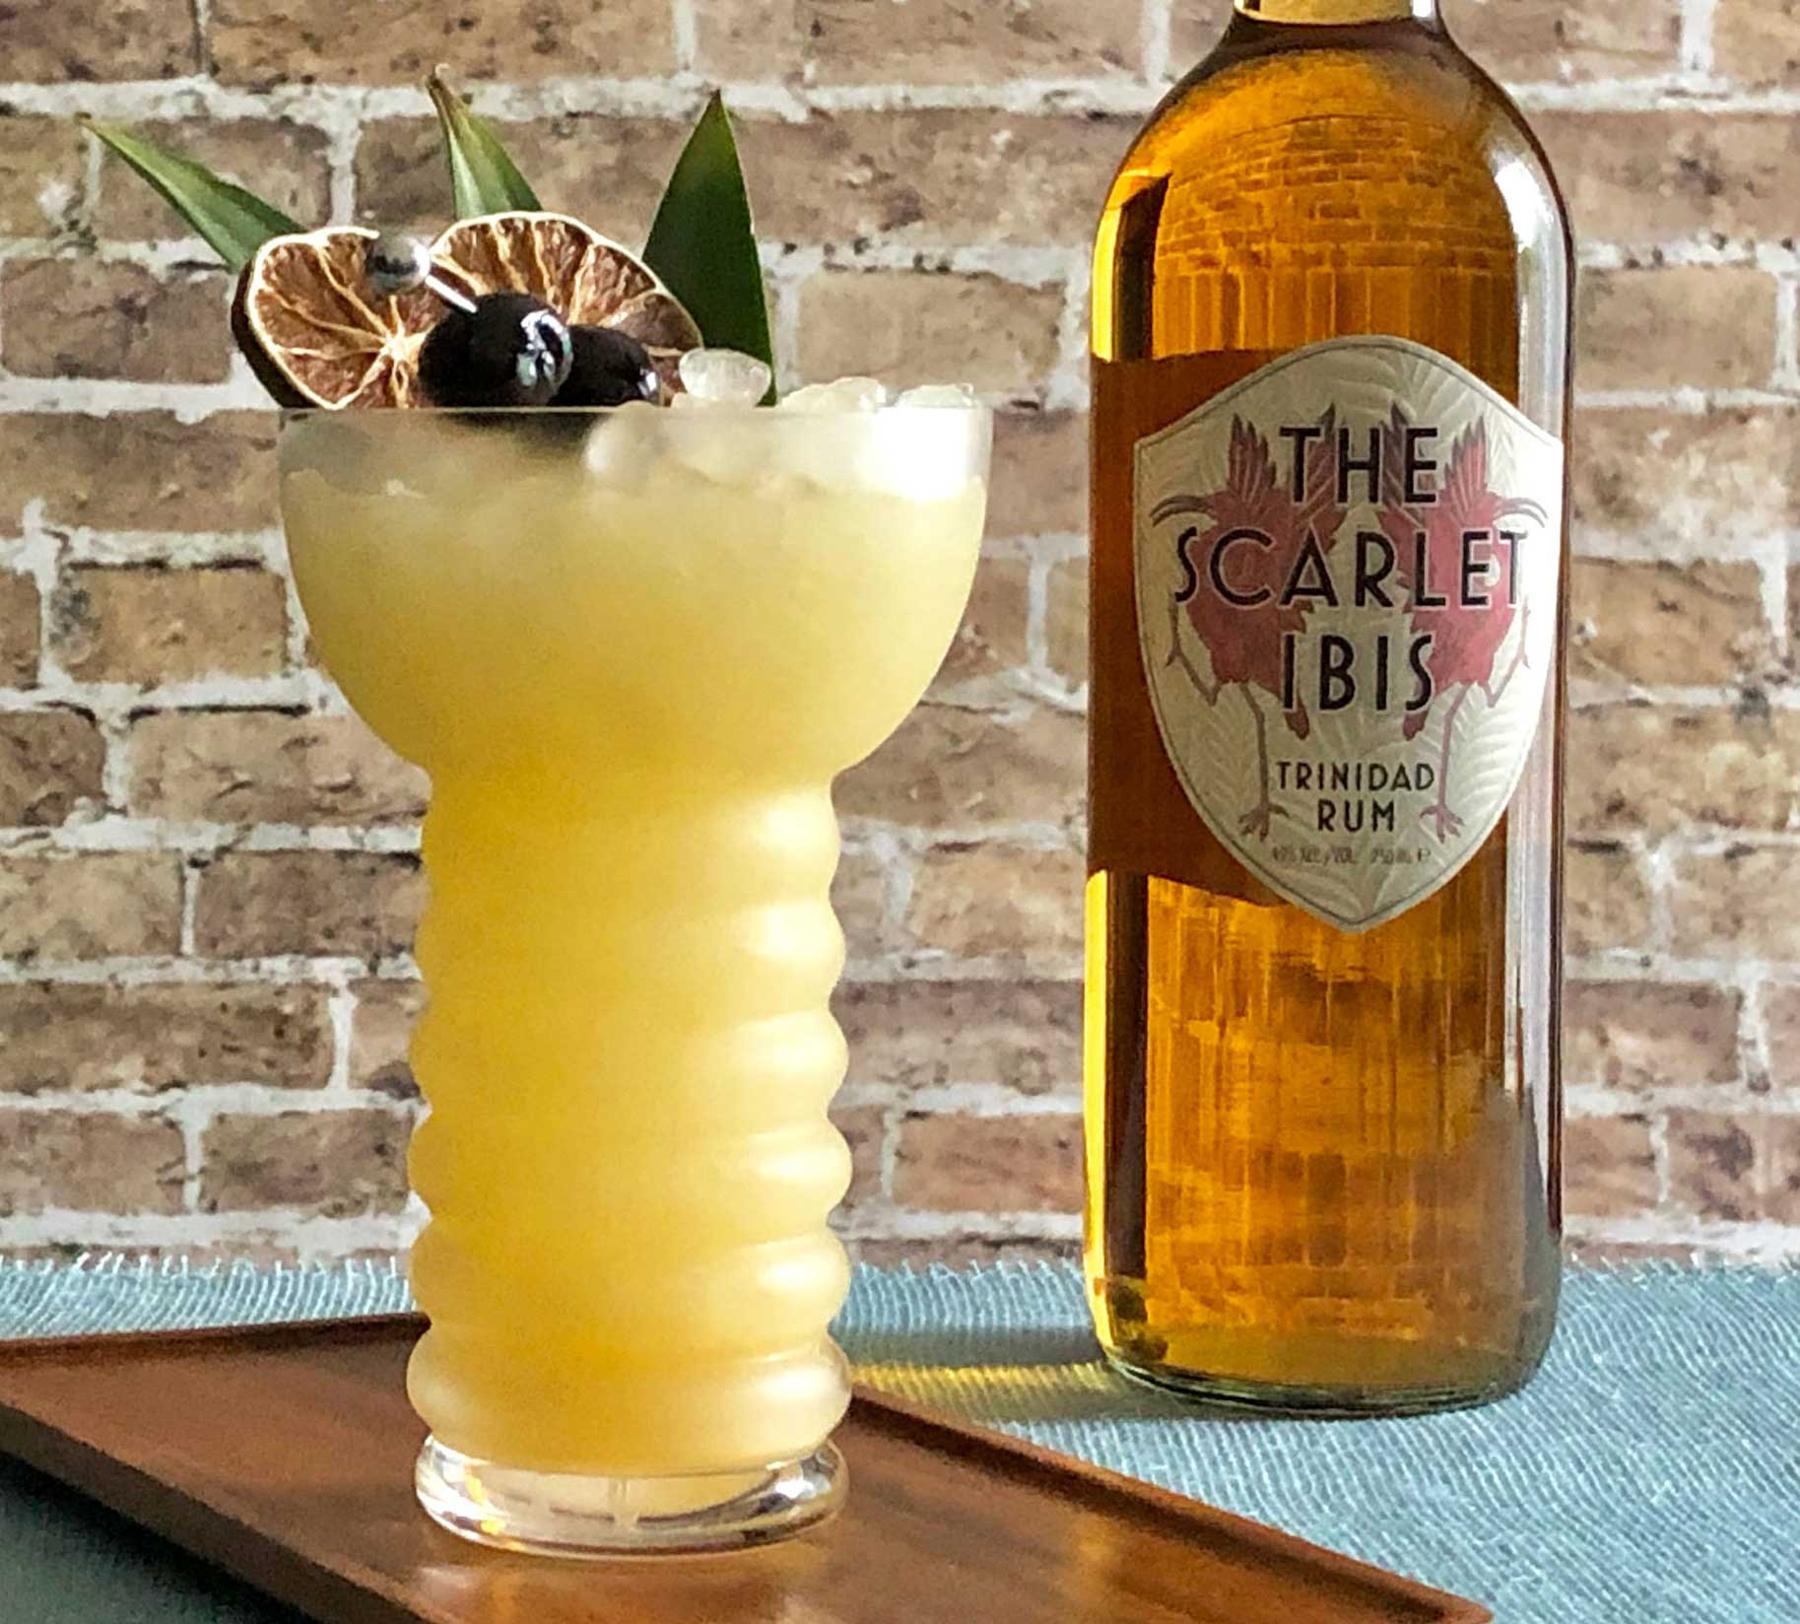 An example of the The Beachbum, the mixed drink (drink), by John Deragon, PDT, New York City, featuring The Scarlet Ibis Trinidad Rum, light rum, pineapple juice, lime juice, Rothman & Winter Orchard Apricot Liqueur, orgeat, pineapple leaf, maraschino cherry, and lime wheel